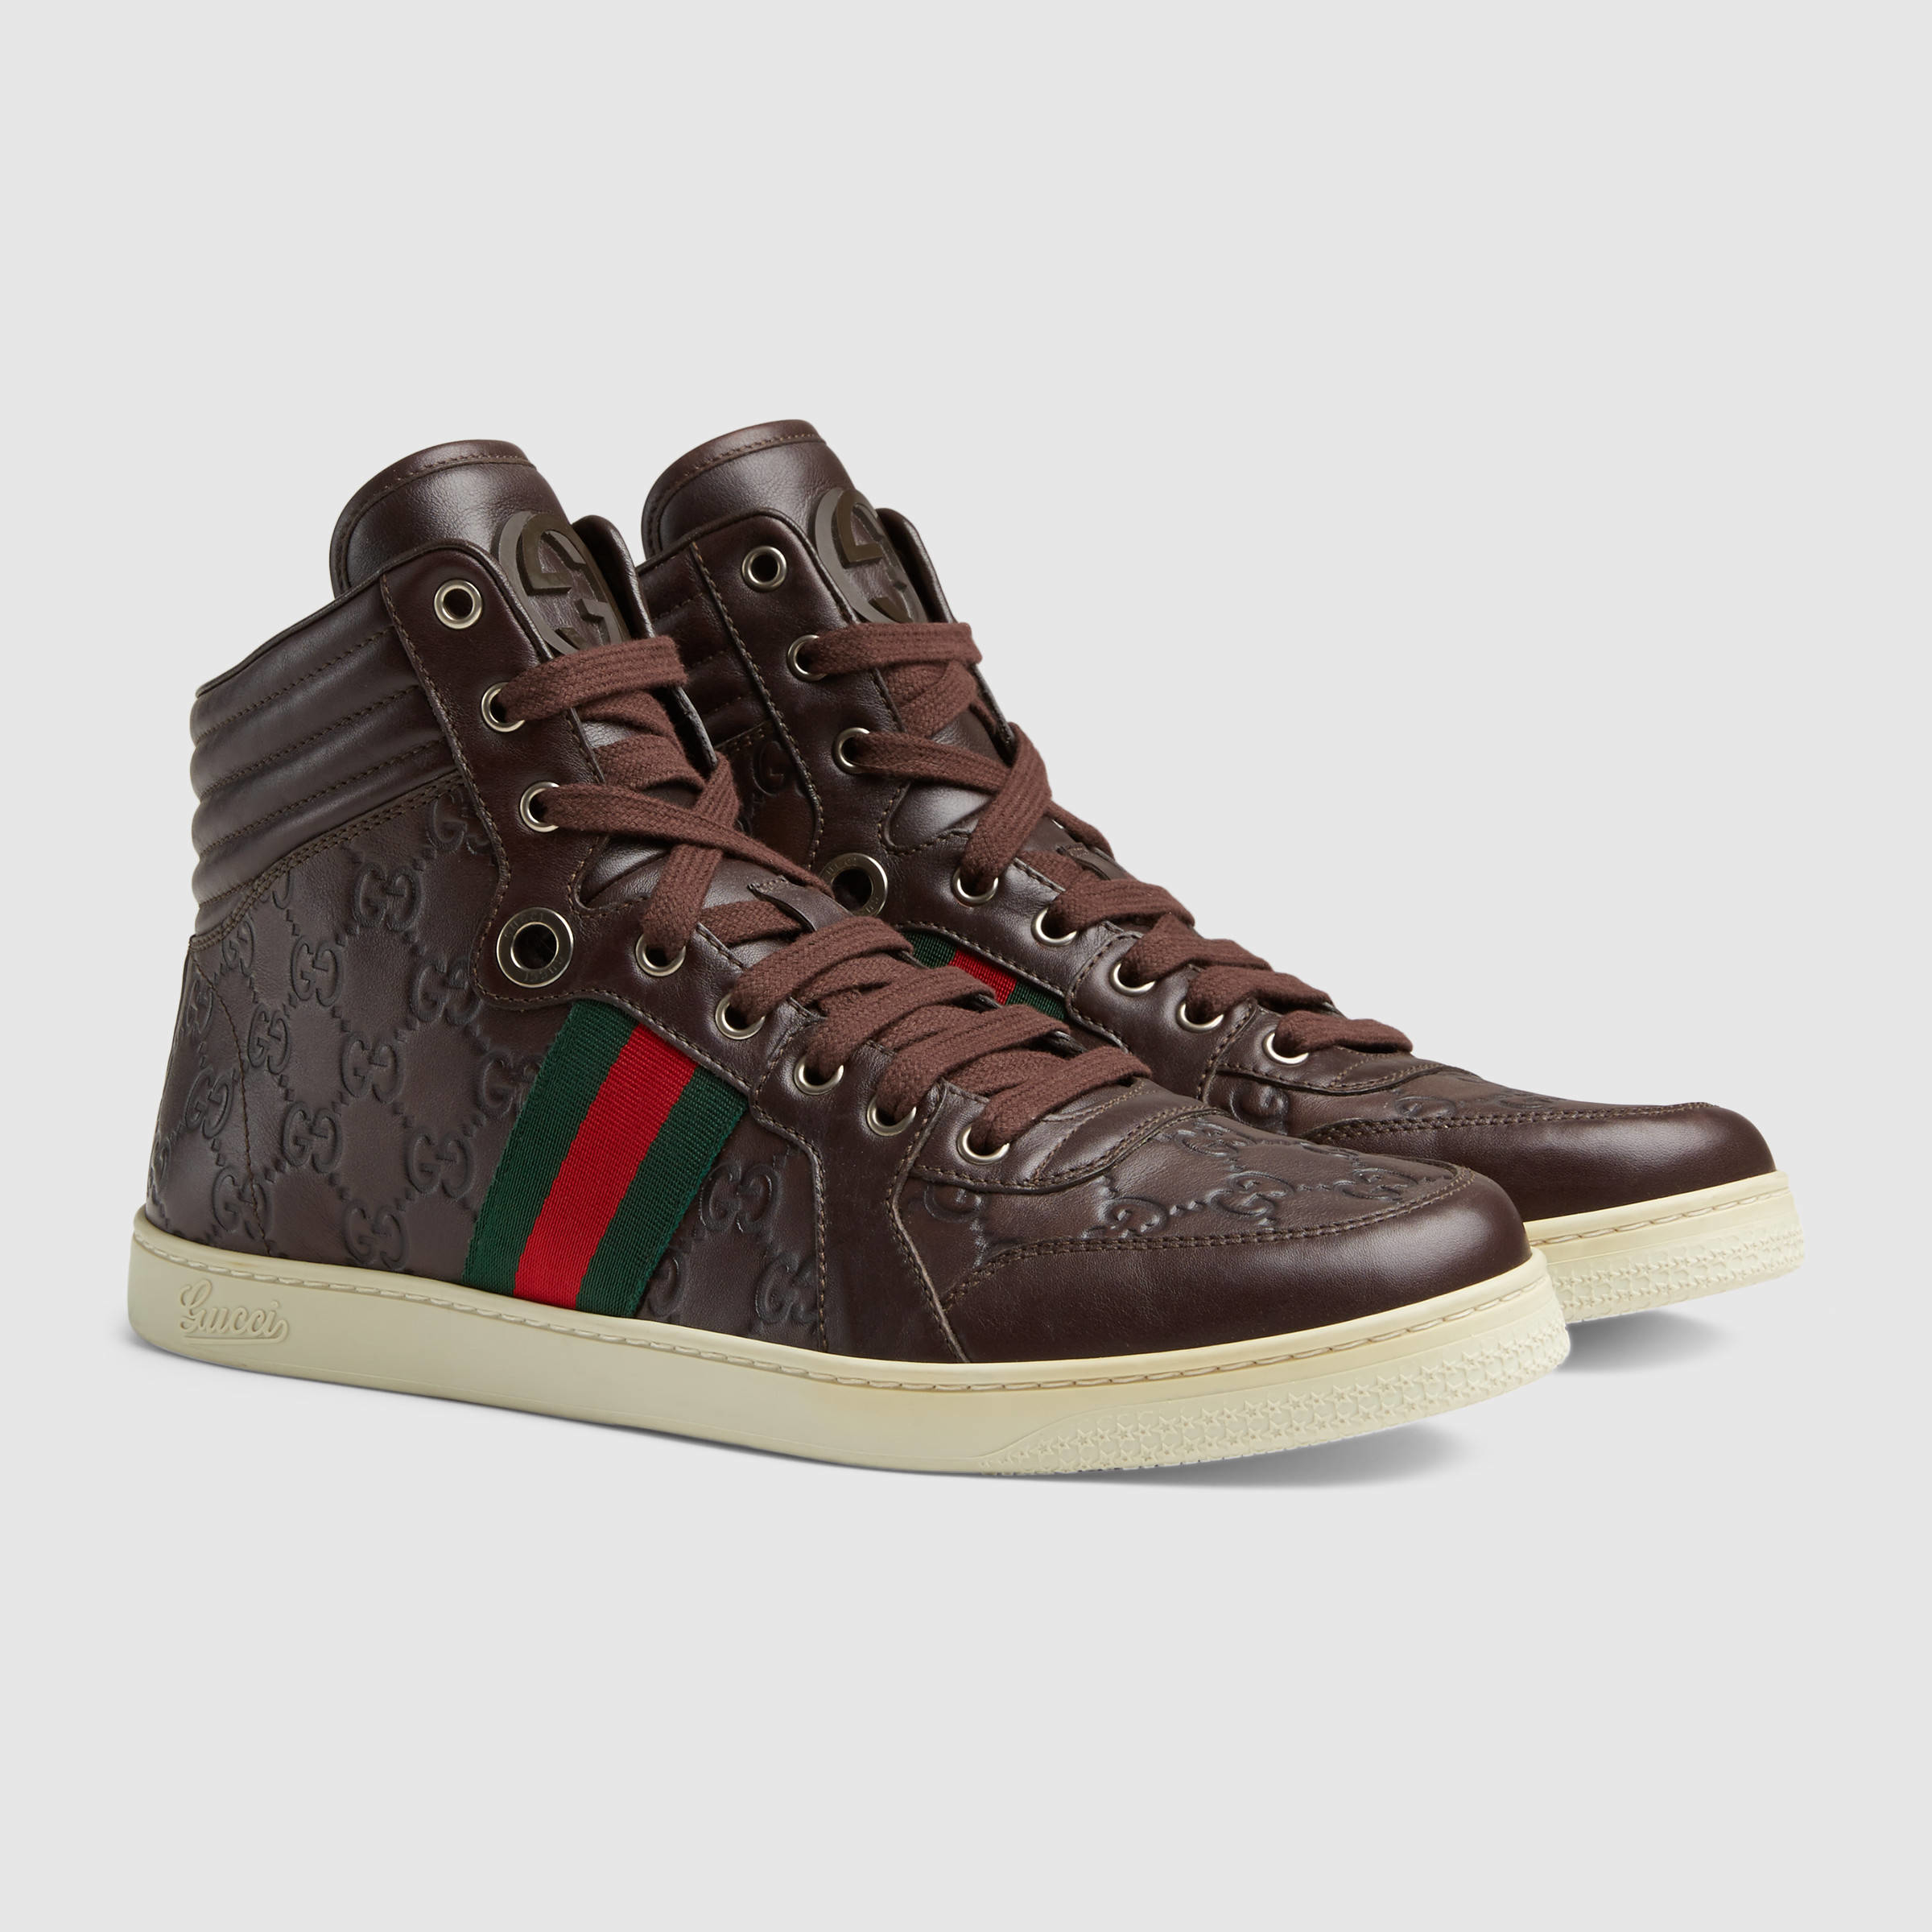 Gucci Ssima Leather High-top Sneaker in Brown for Men - Lyst